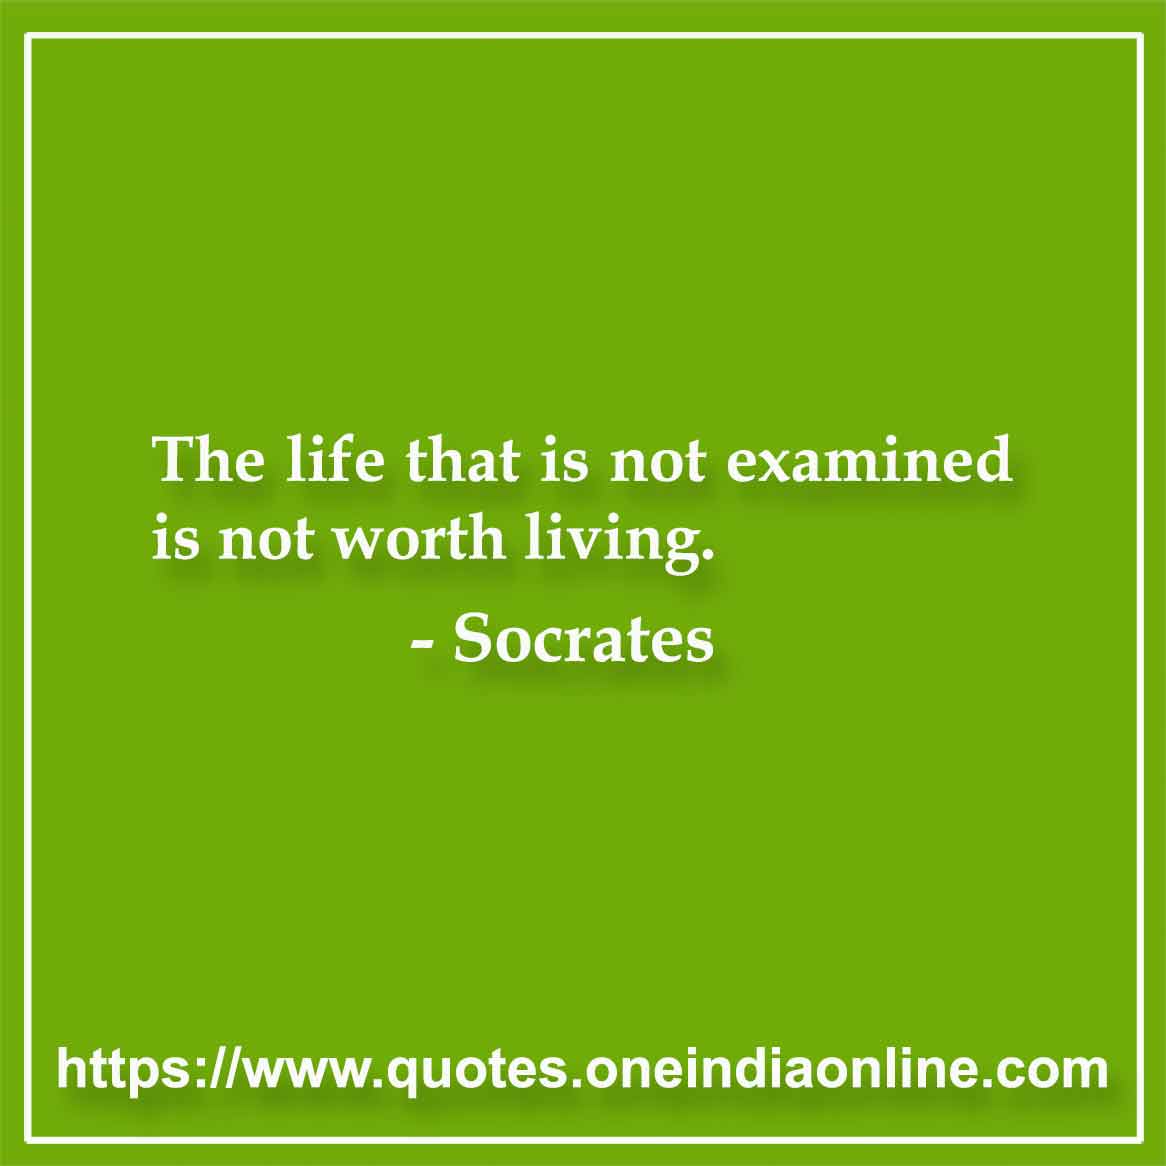 The life that is not examined is not worth living. - Socrates